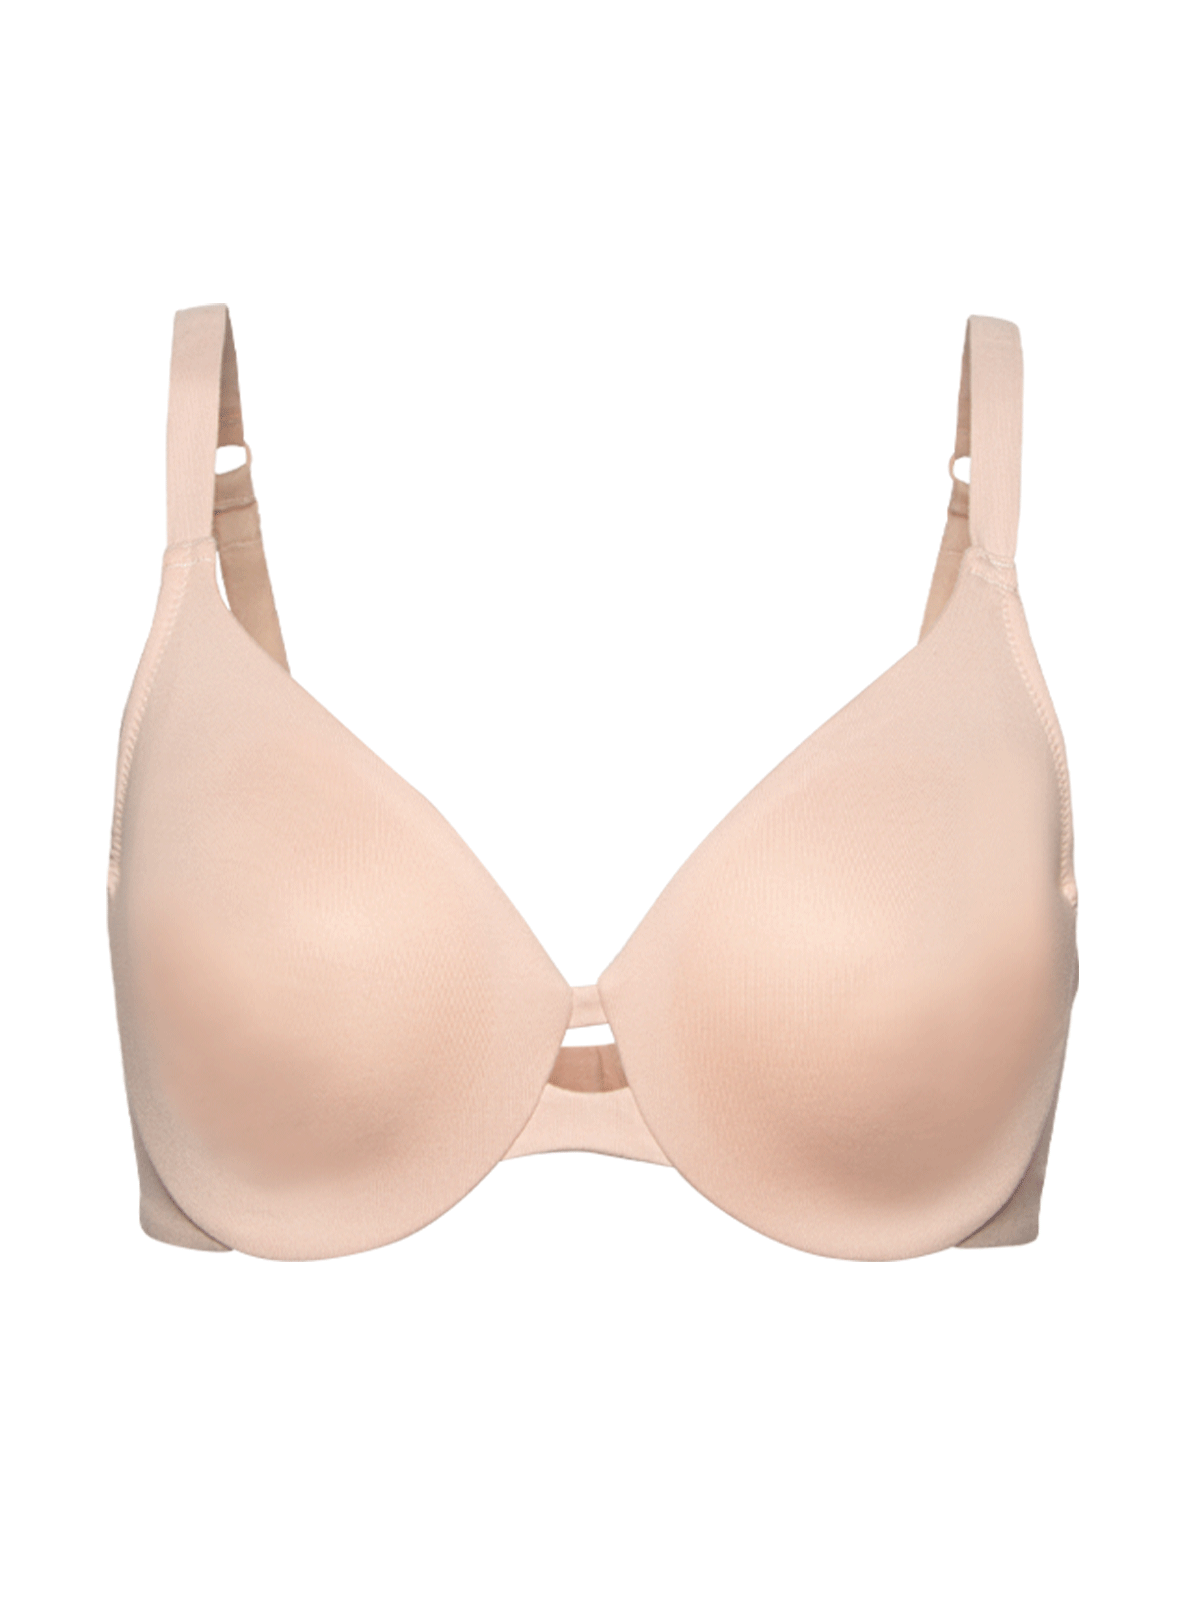 Paramour by Felina Spacer Bra 135030 - Down Under Specialised Lingerie